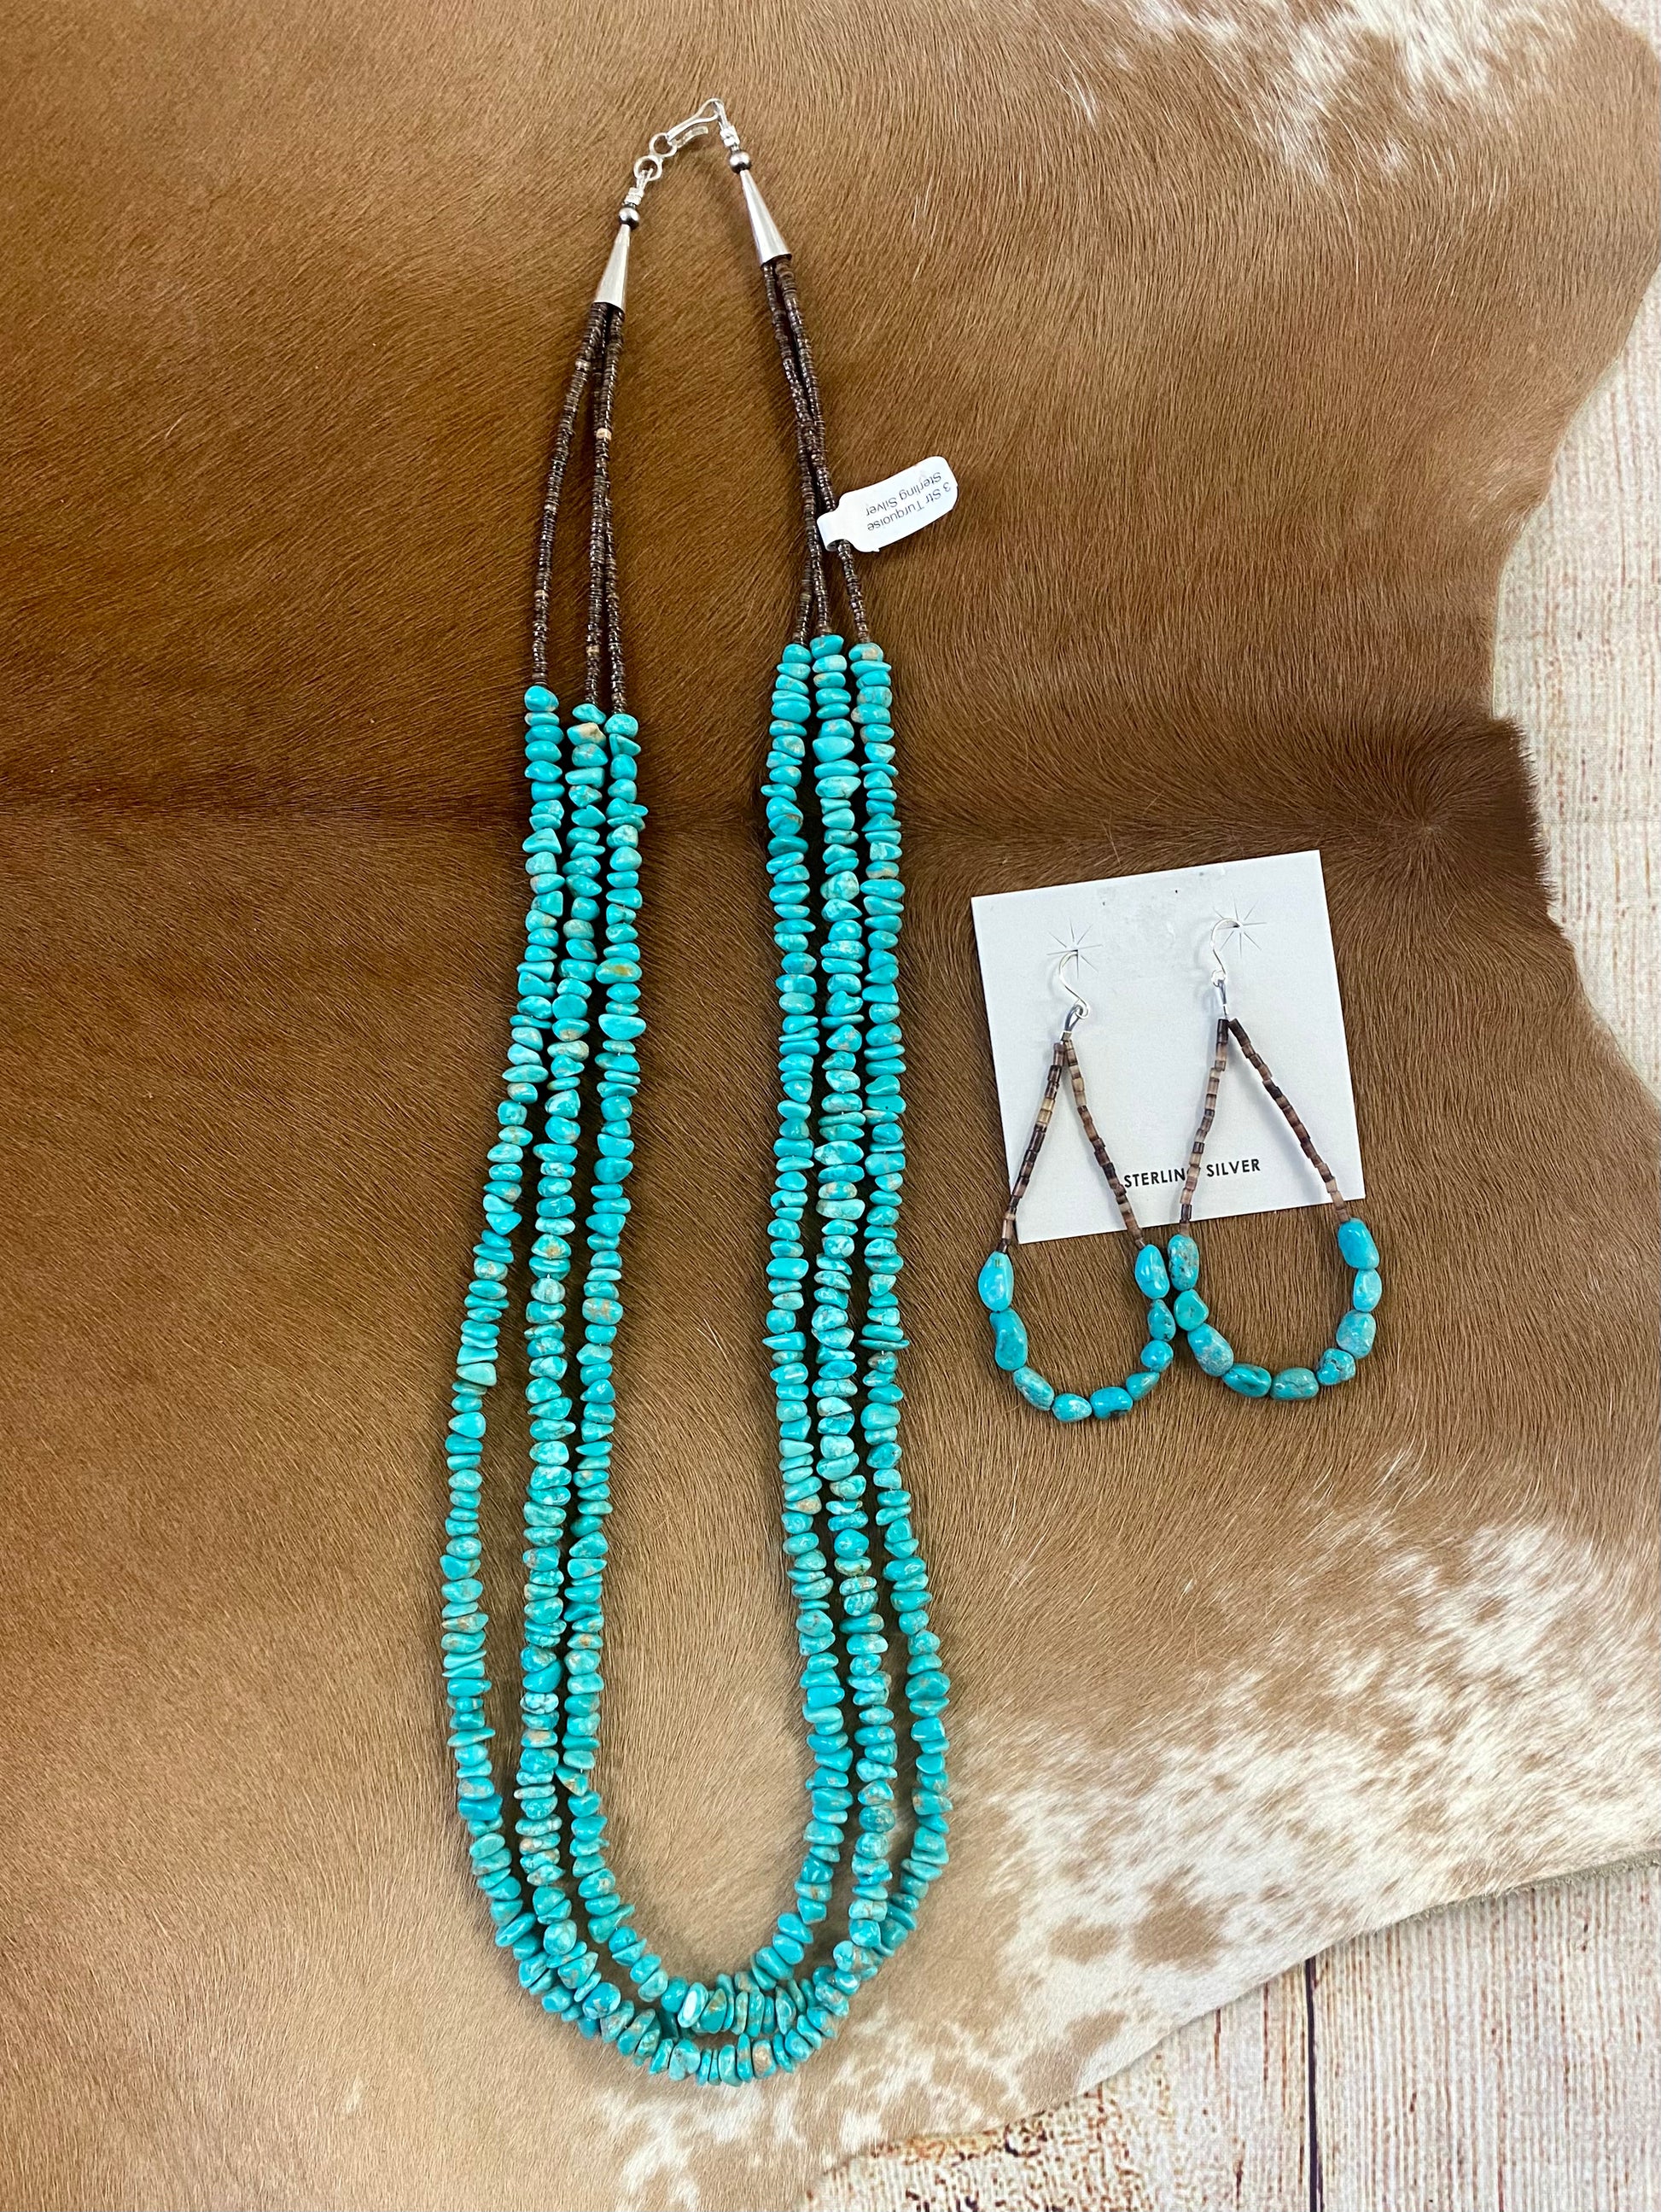 This handmade 25” inches long length necklace is an absolute beauty. A stunning three-strand turquoise beaded necklace with brown heishi beads. Layer it or wear it alone or add a pendant to keep your look totally unique. The perfect dainty layering piece! Simple, yet striking!   Size: 25” Inches Length   Stone: Turquoise 